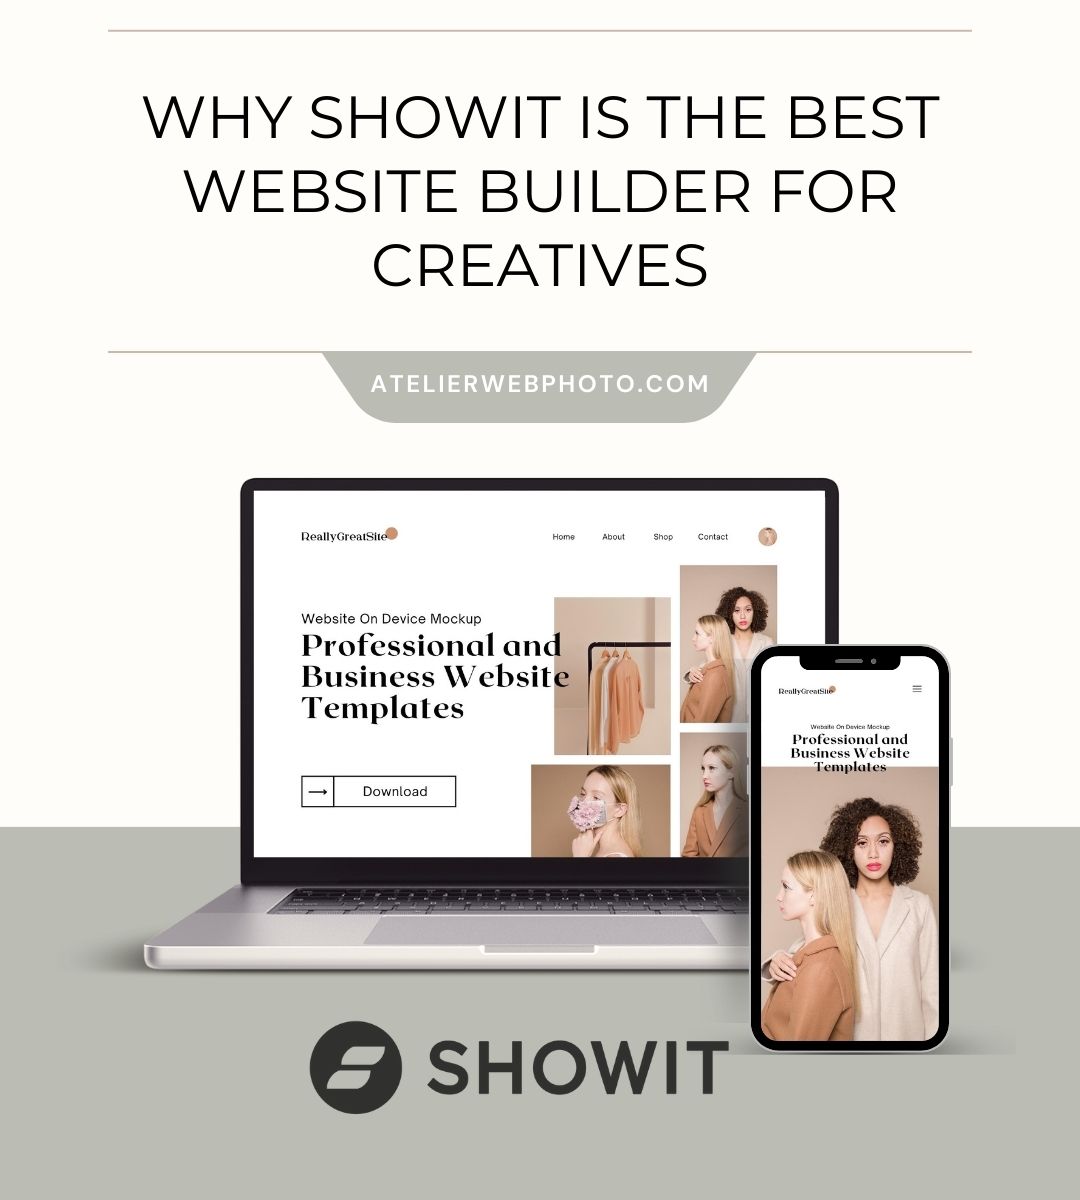 Why Showit is the Best Website Builder for Creatives